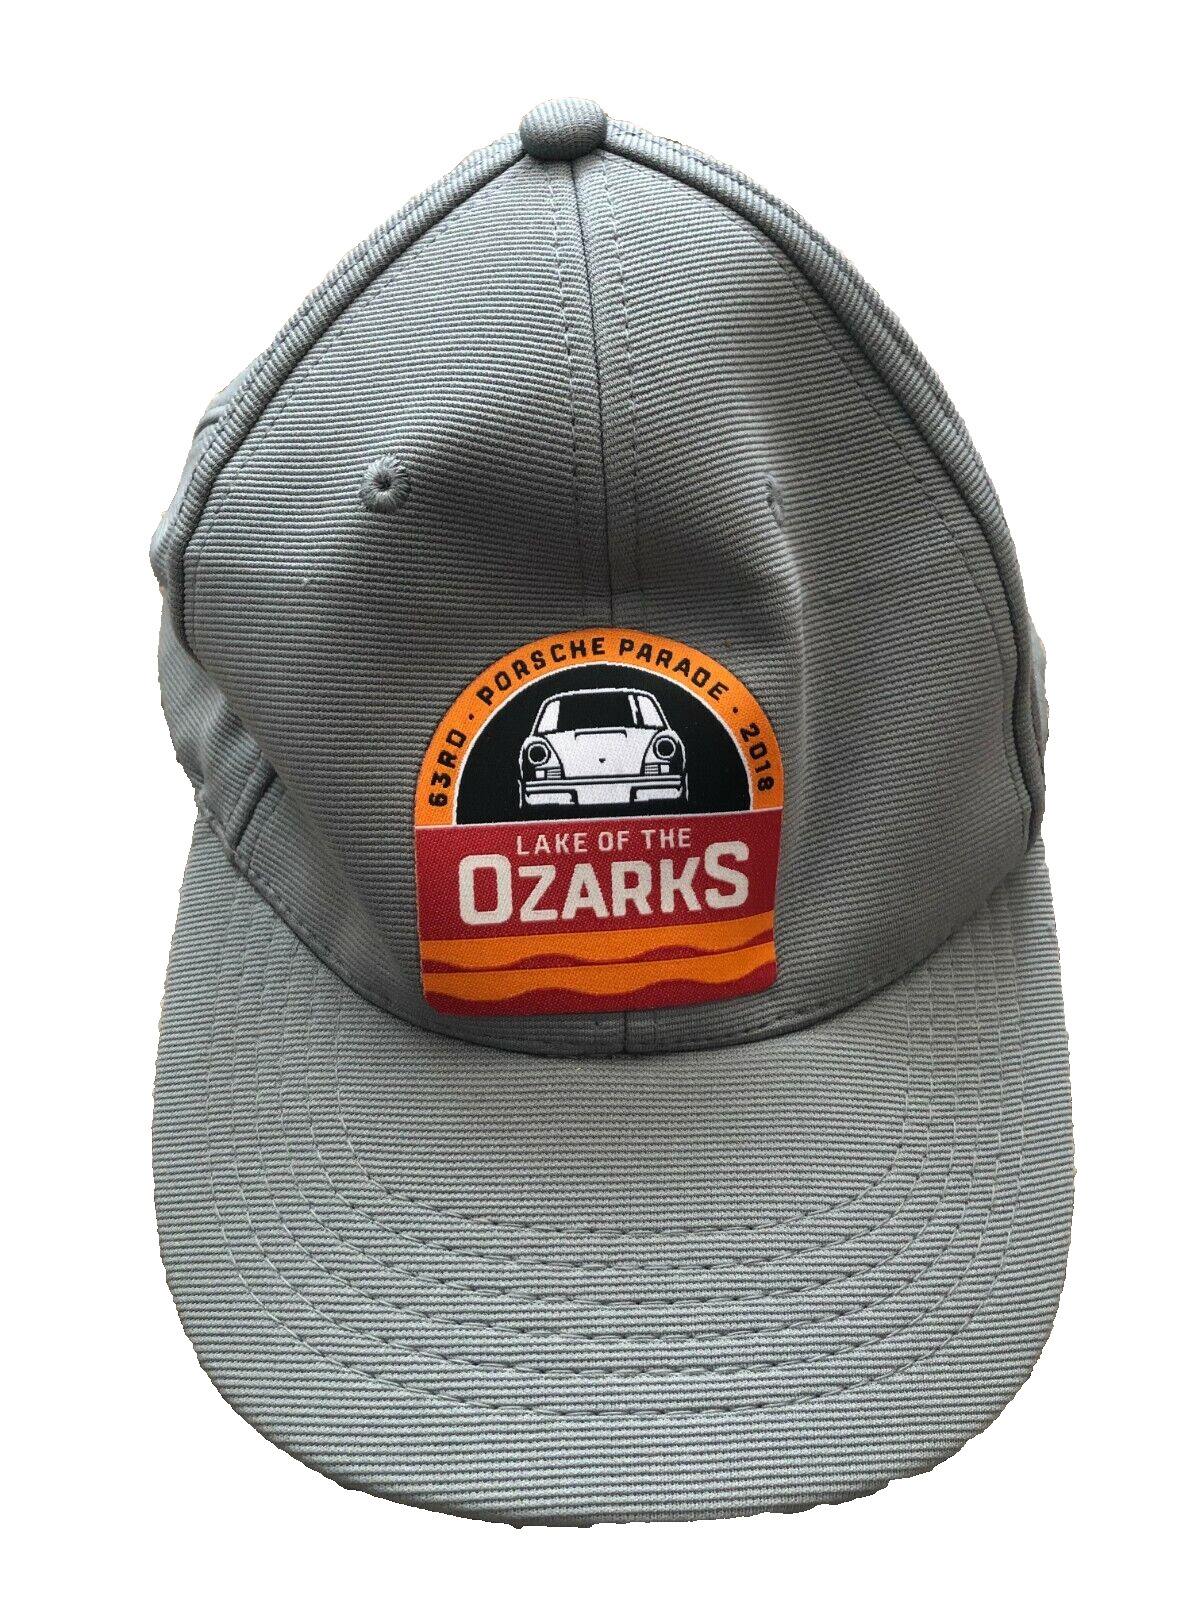 63rd Annual 2018 Porsche Parade Lake Of The Ozarks Hat Cap - Adjustable